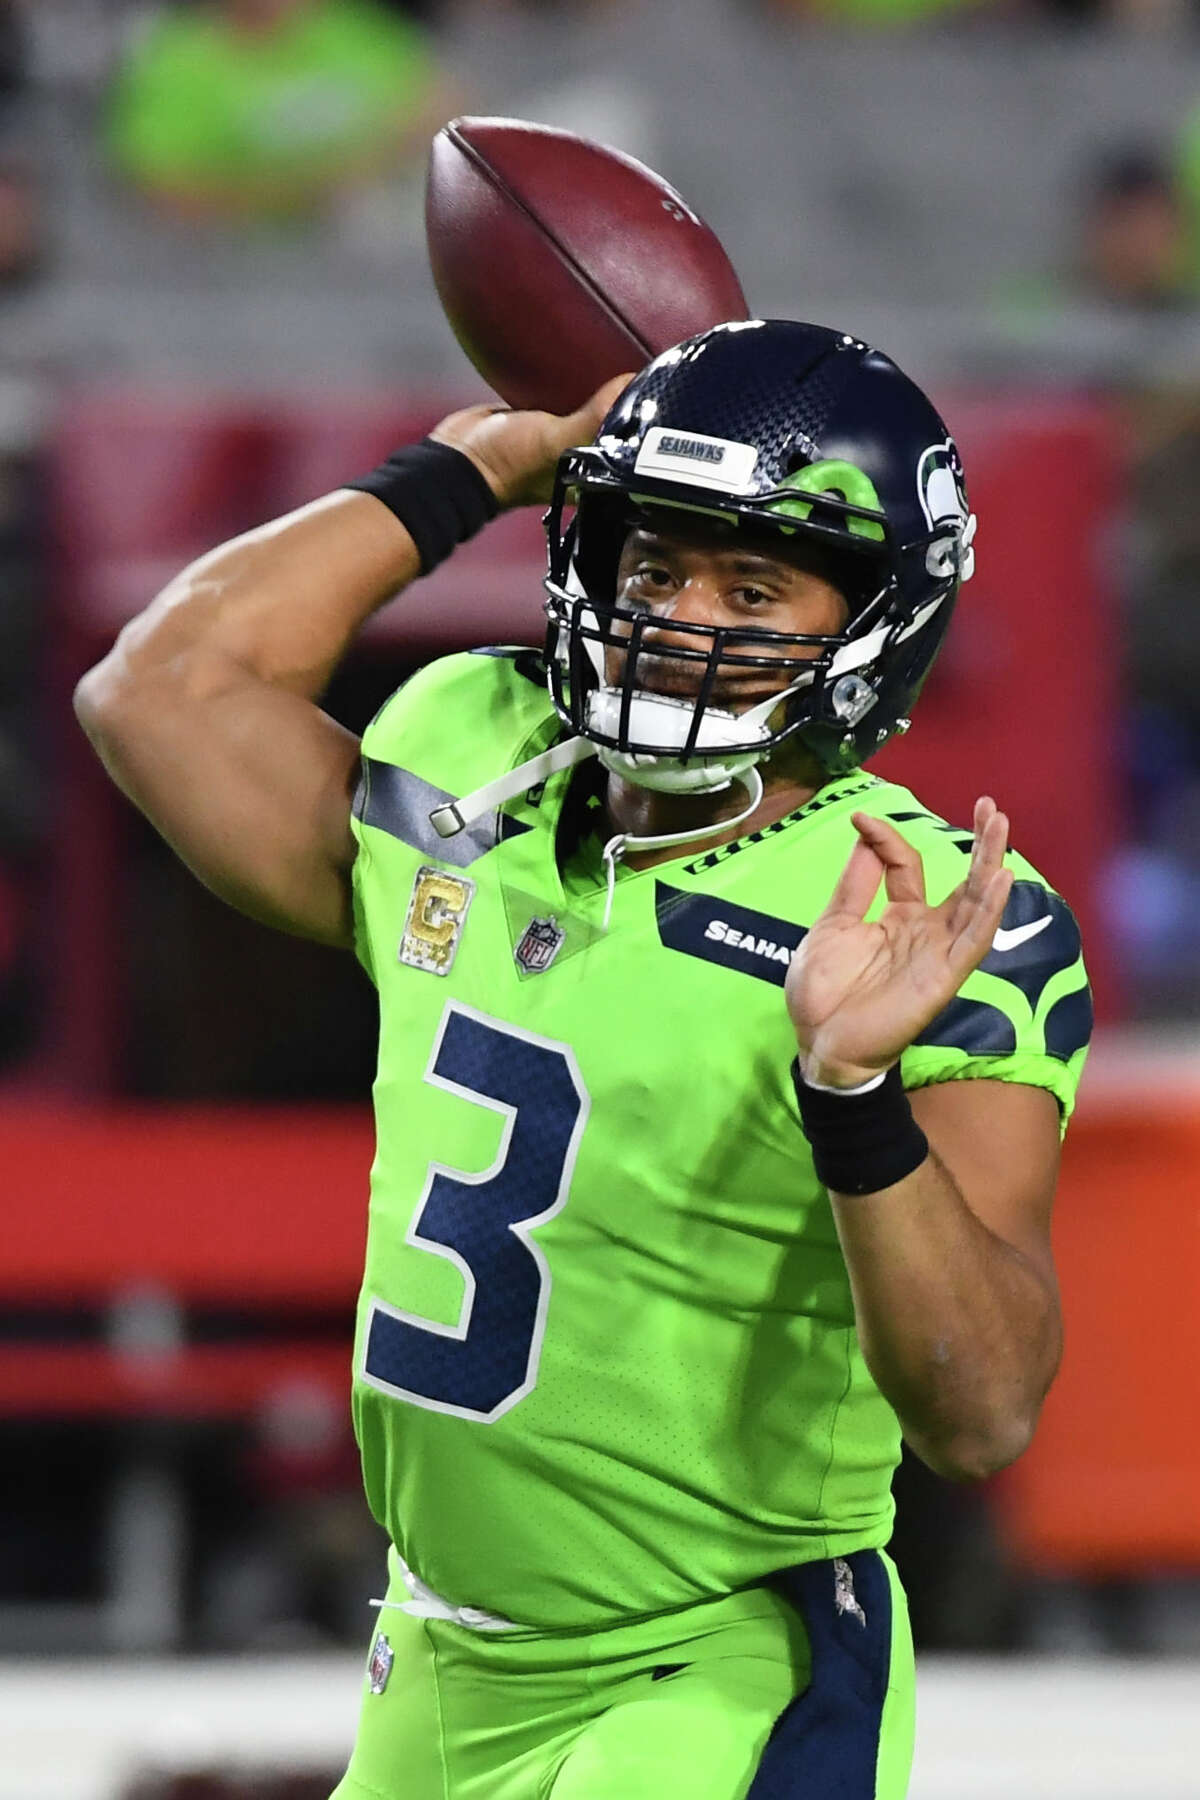 GLENDALE, AZ - NOVEMBER 09: Quarterback Russell Wilson #3 of the Seattle Seahawks warms up for the NFL game against the Arizona Cardinals at University of Phoenix Stadium on November 9, 2017 in Glendale, Arizona. (Photo by Norm Hall/Getty Images) ORG XMIT: 700070729